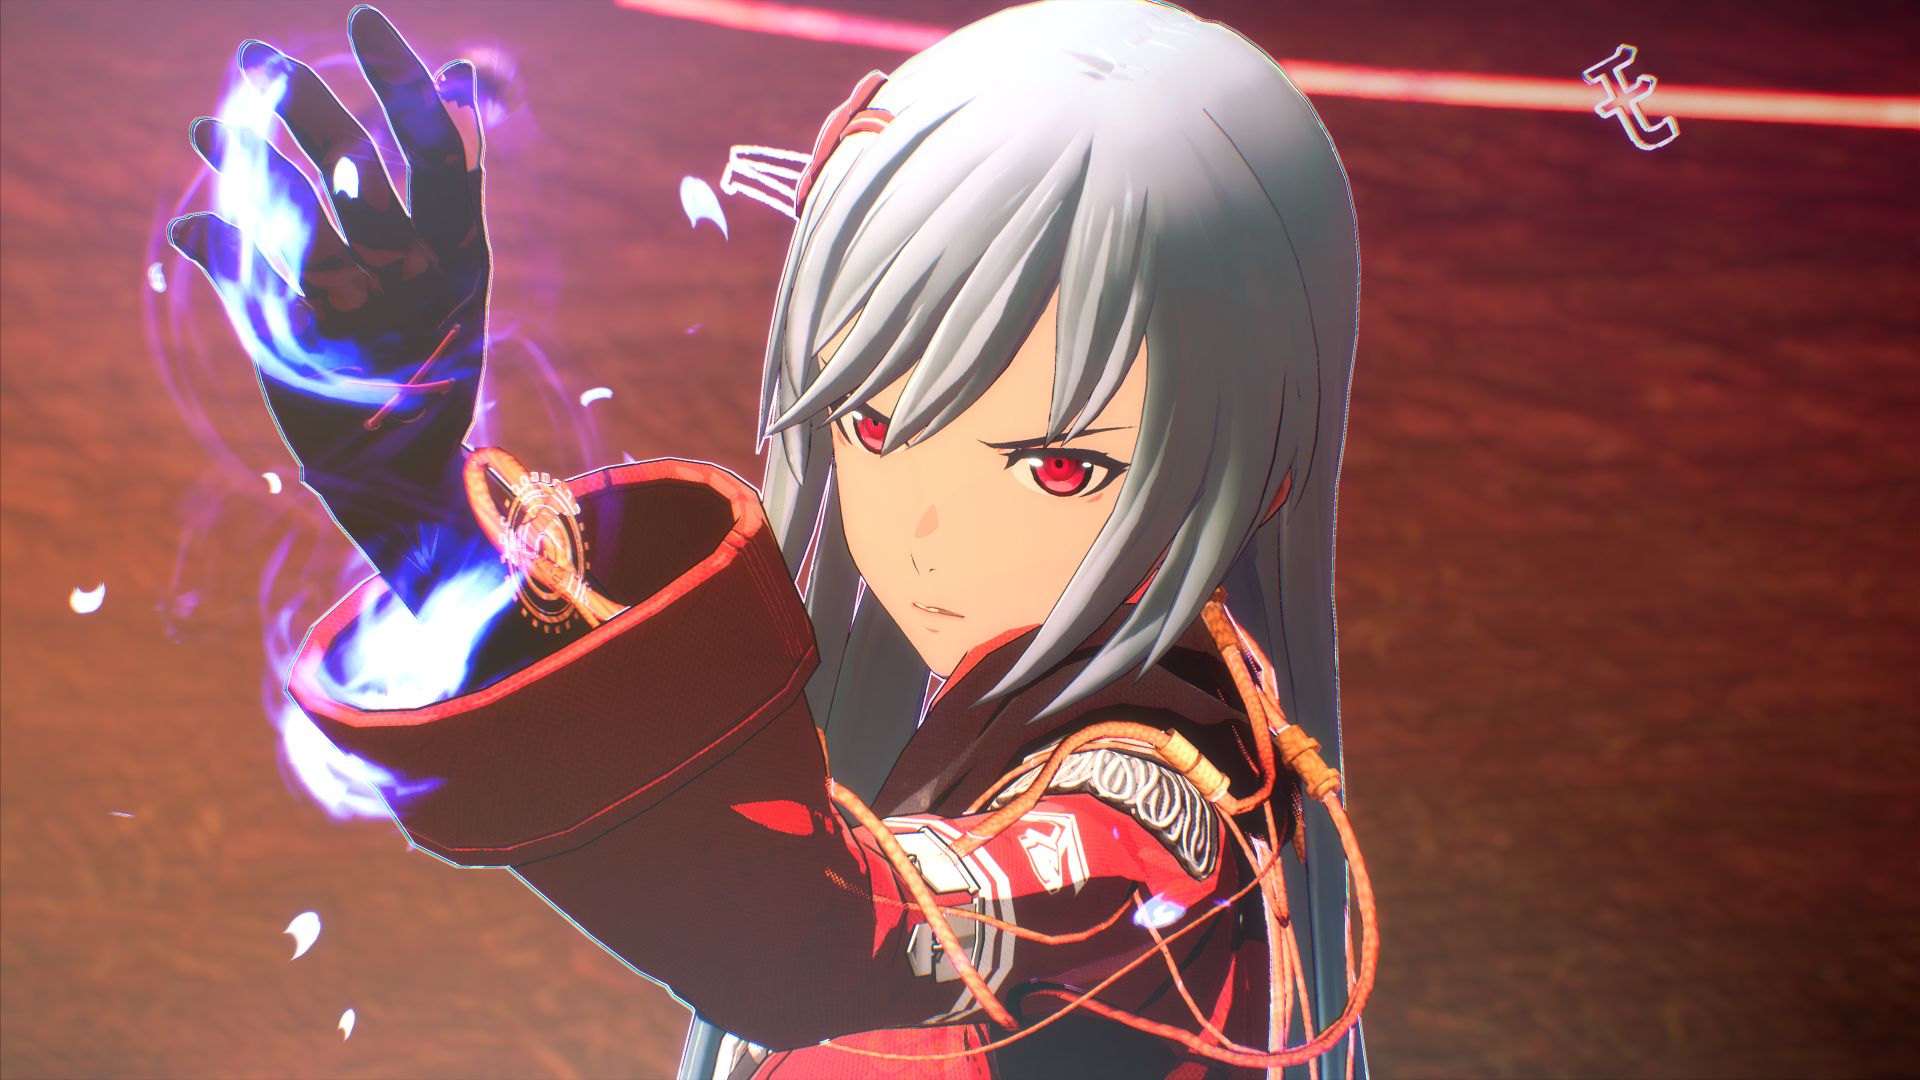 Scarlet Nexus' Anime-Style Action Has Potential But Hasn't Fully Impressed  Yet - GameSpot